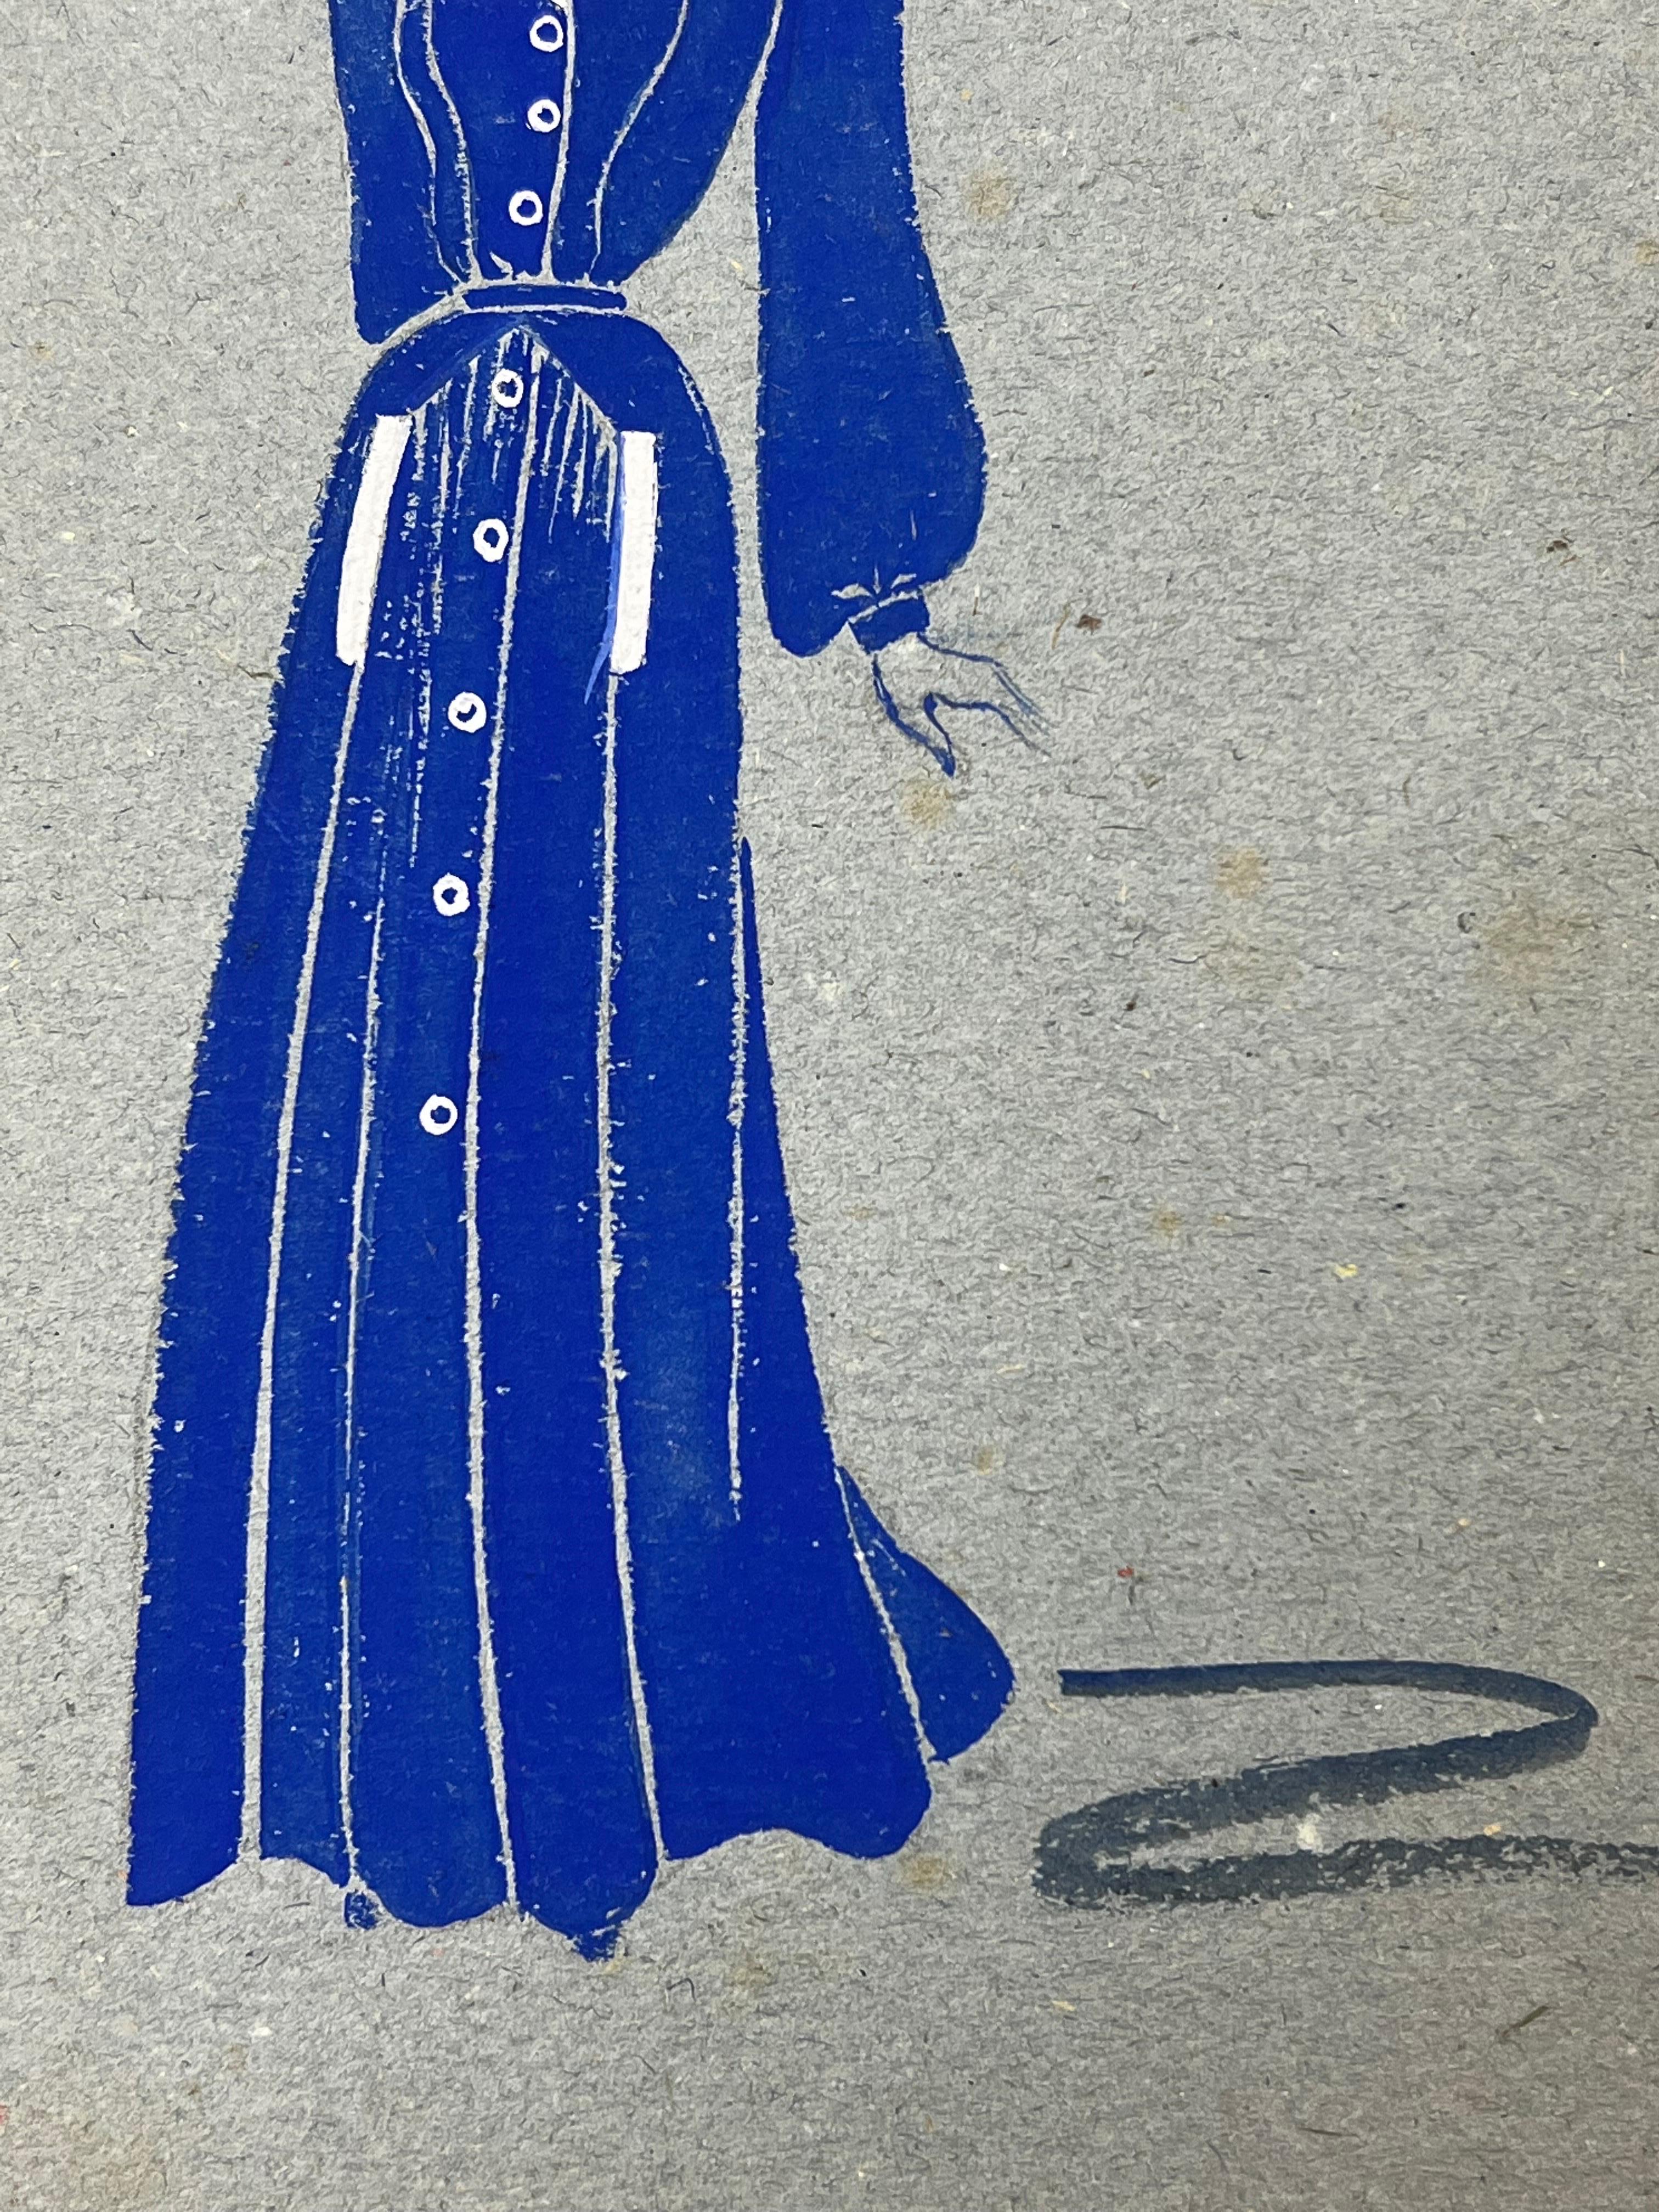 1940's Fashion Illustration, Lady in Blue Dress In Good Condition For Sale In Cirencester, GB